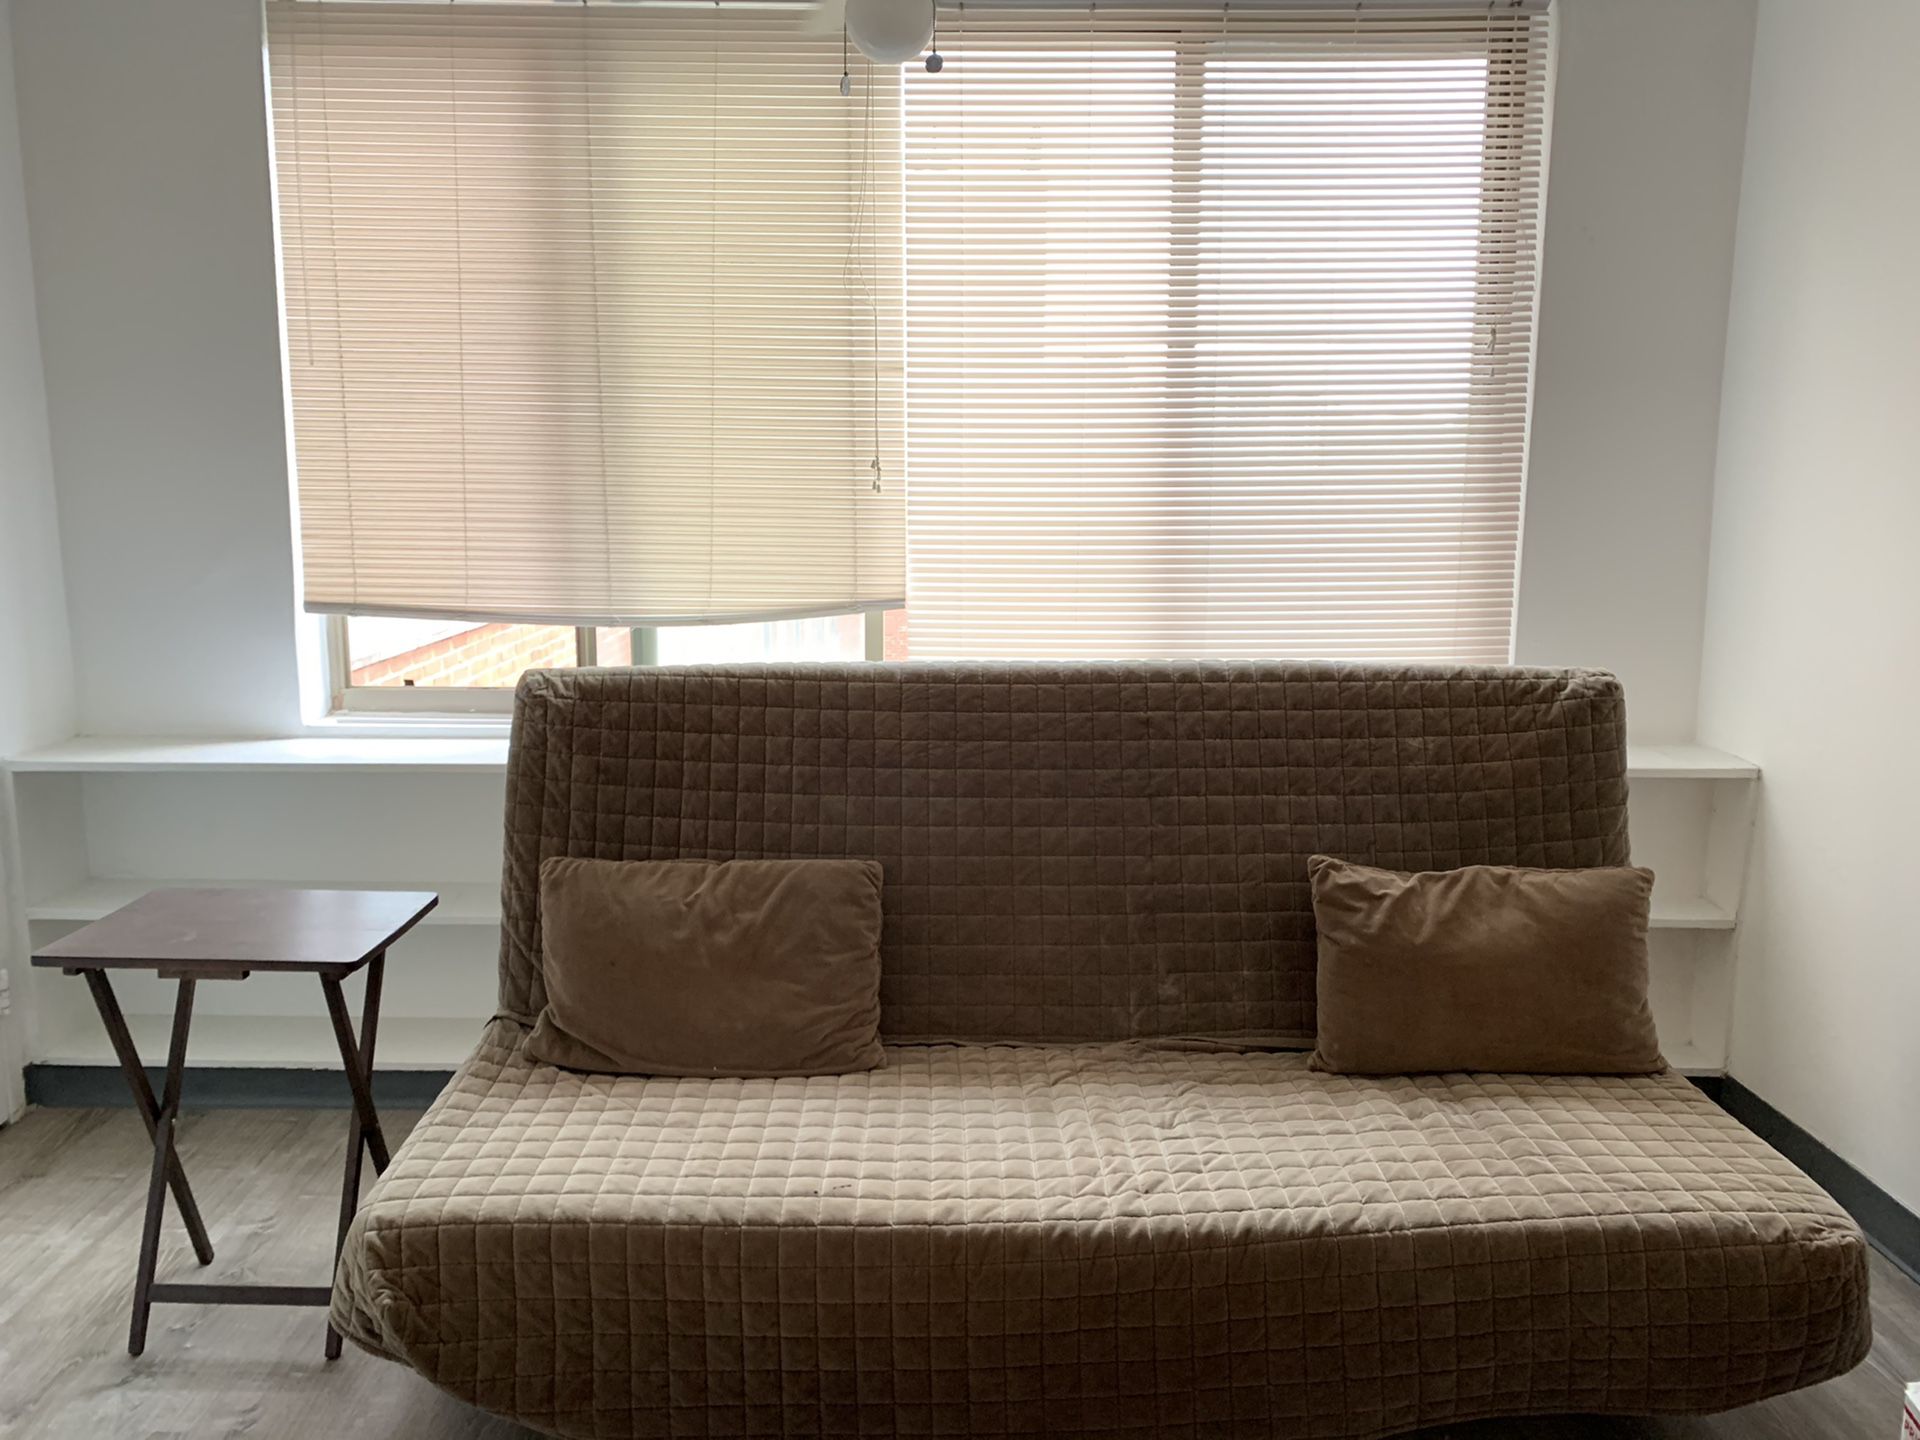 MUST GO BY 5/29 Futon with Comfy Brown Corduroy Cover and Pillows Plus Foldable Side Table - $395 Value